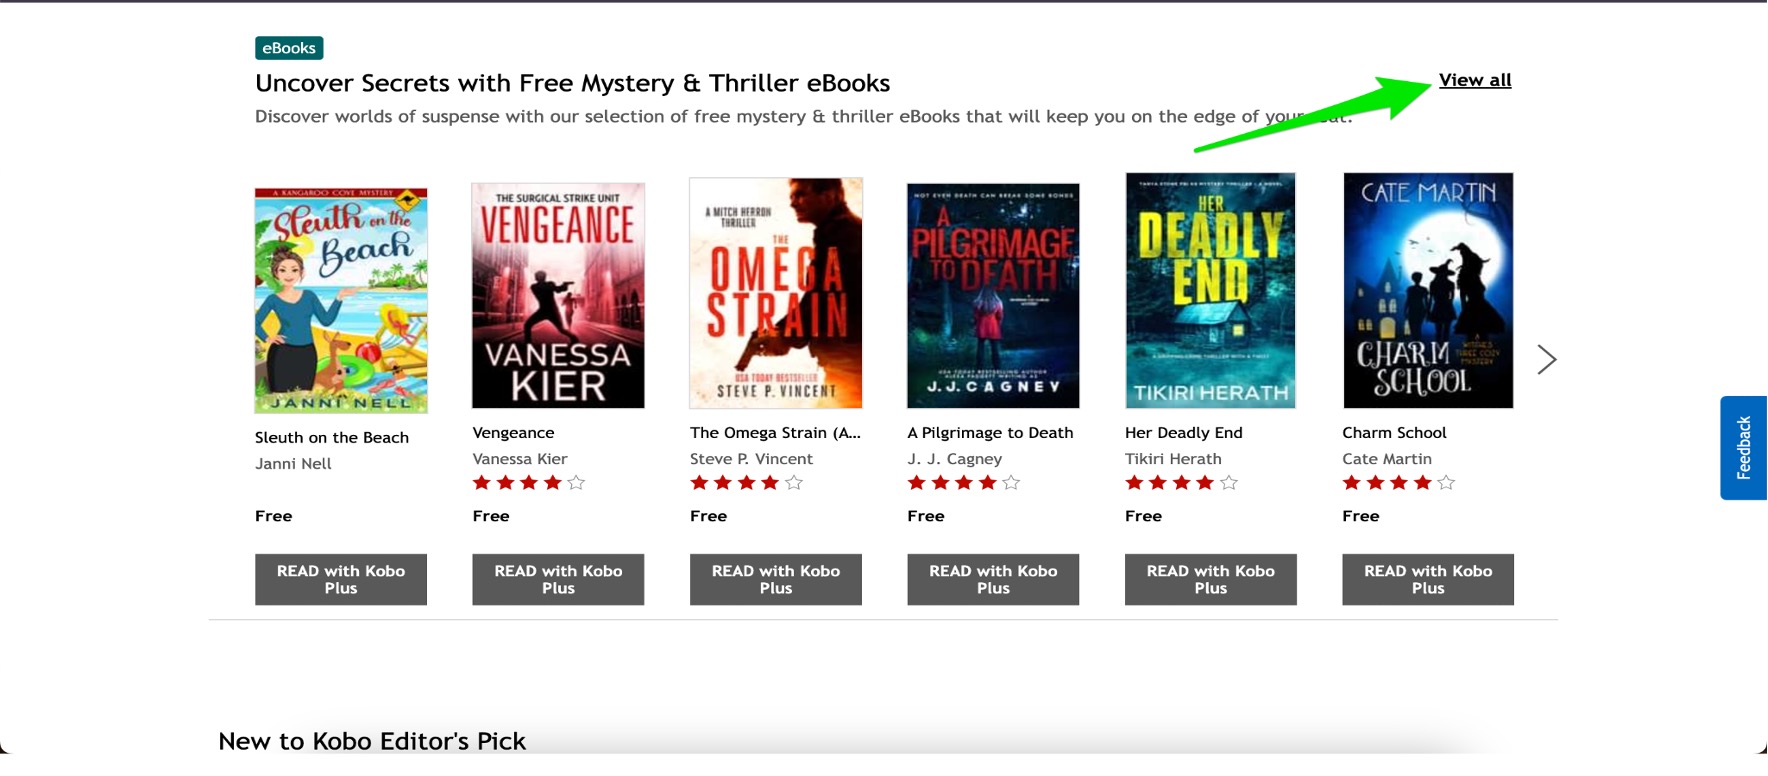 How to Find Free Books on Kobo3